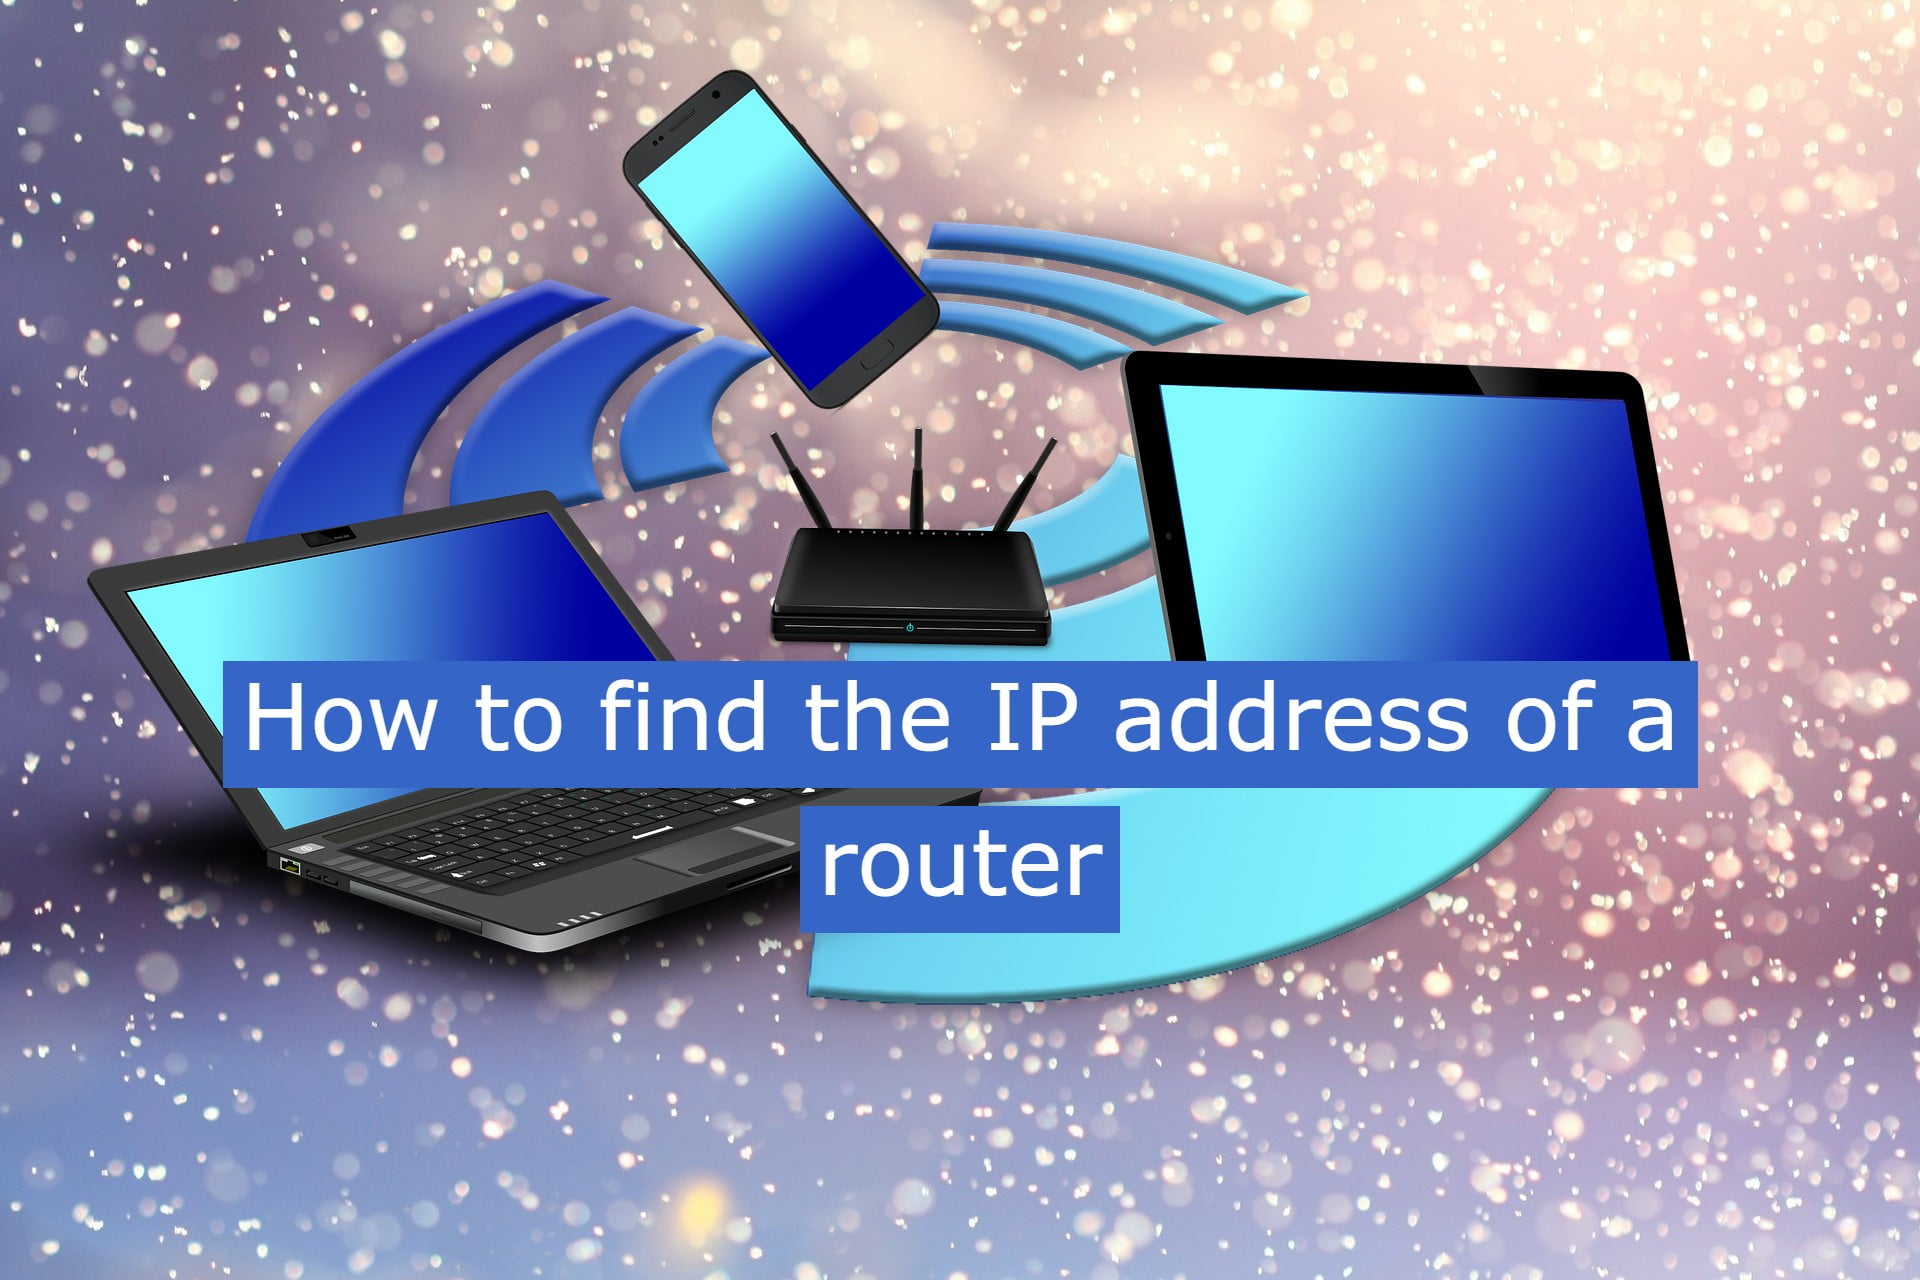 How to find the IP address of a router